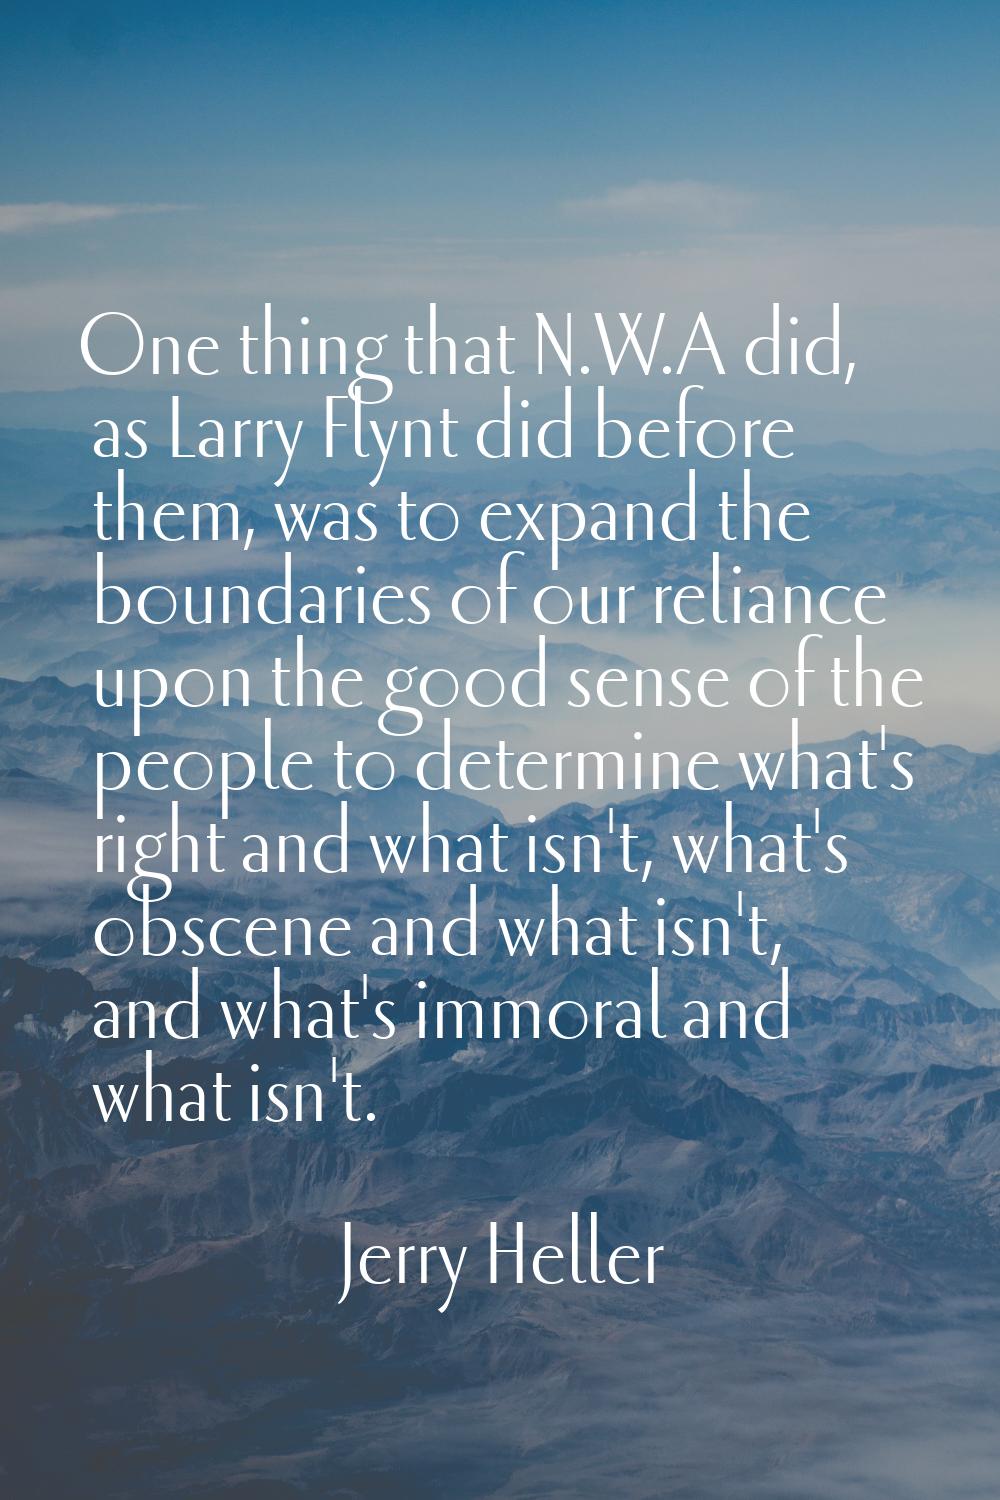 One thing that N.W.A did, as Larry Flynt did before them, was to expand the boundaries of our relia